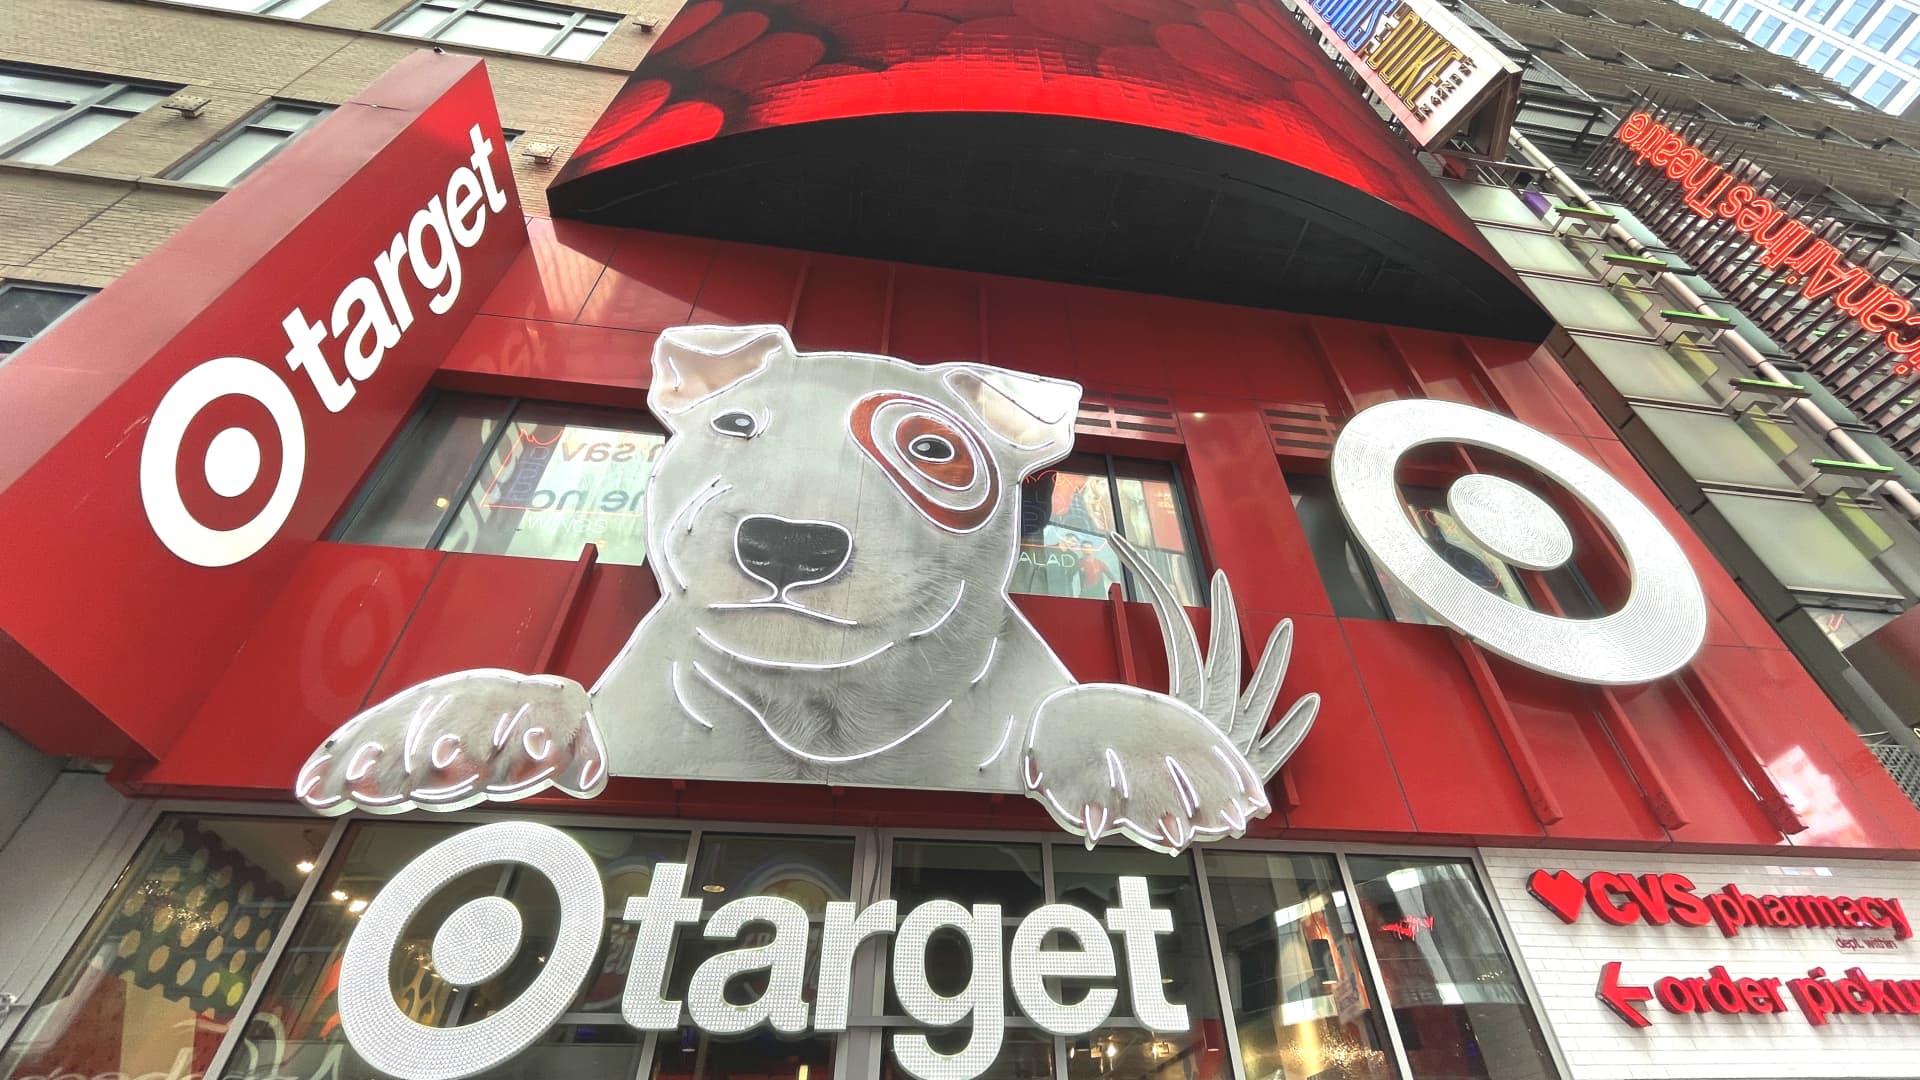 Target will report its earnings before the bell. Here’s what to expect